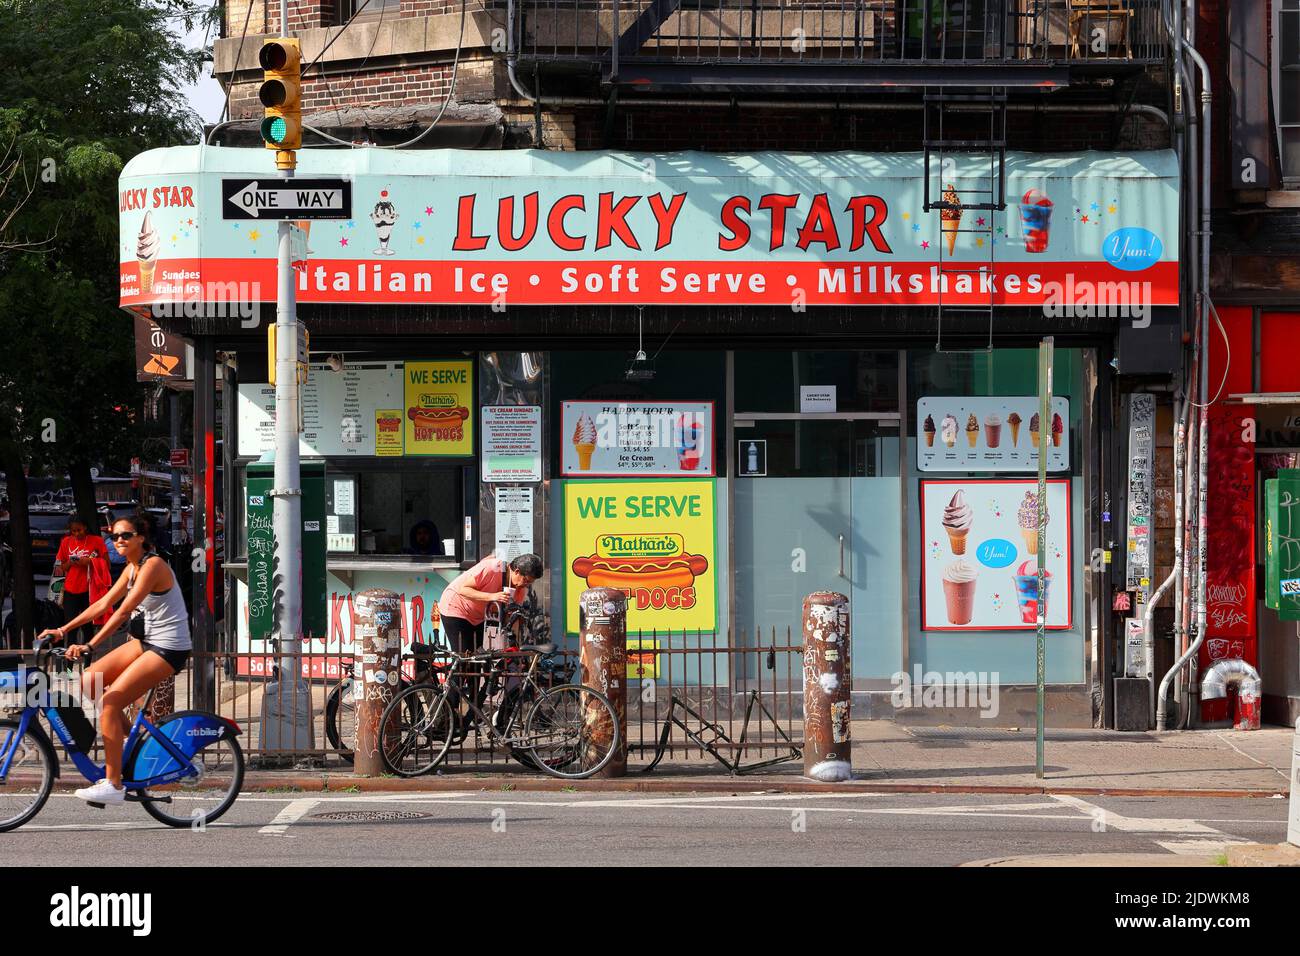 Lucky Star, 166 Delancey St, New York, NYC storefront photo of an ice cream shop in the Lower East Side neighborhood in Manhattan. Stock Photo